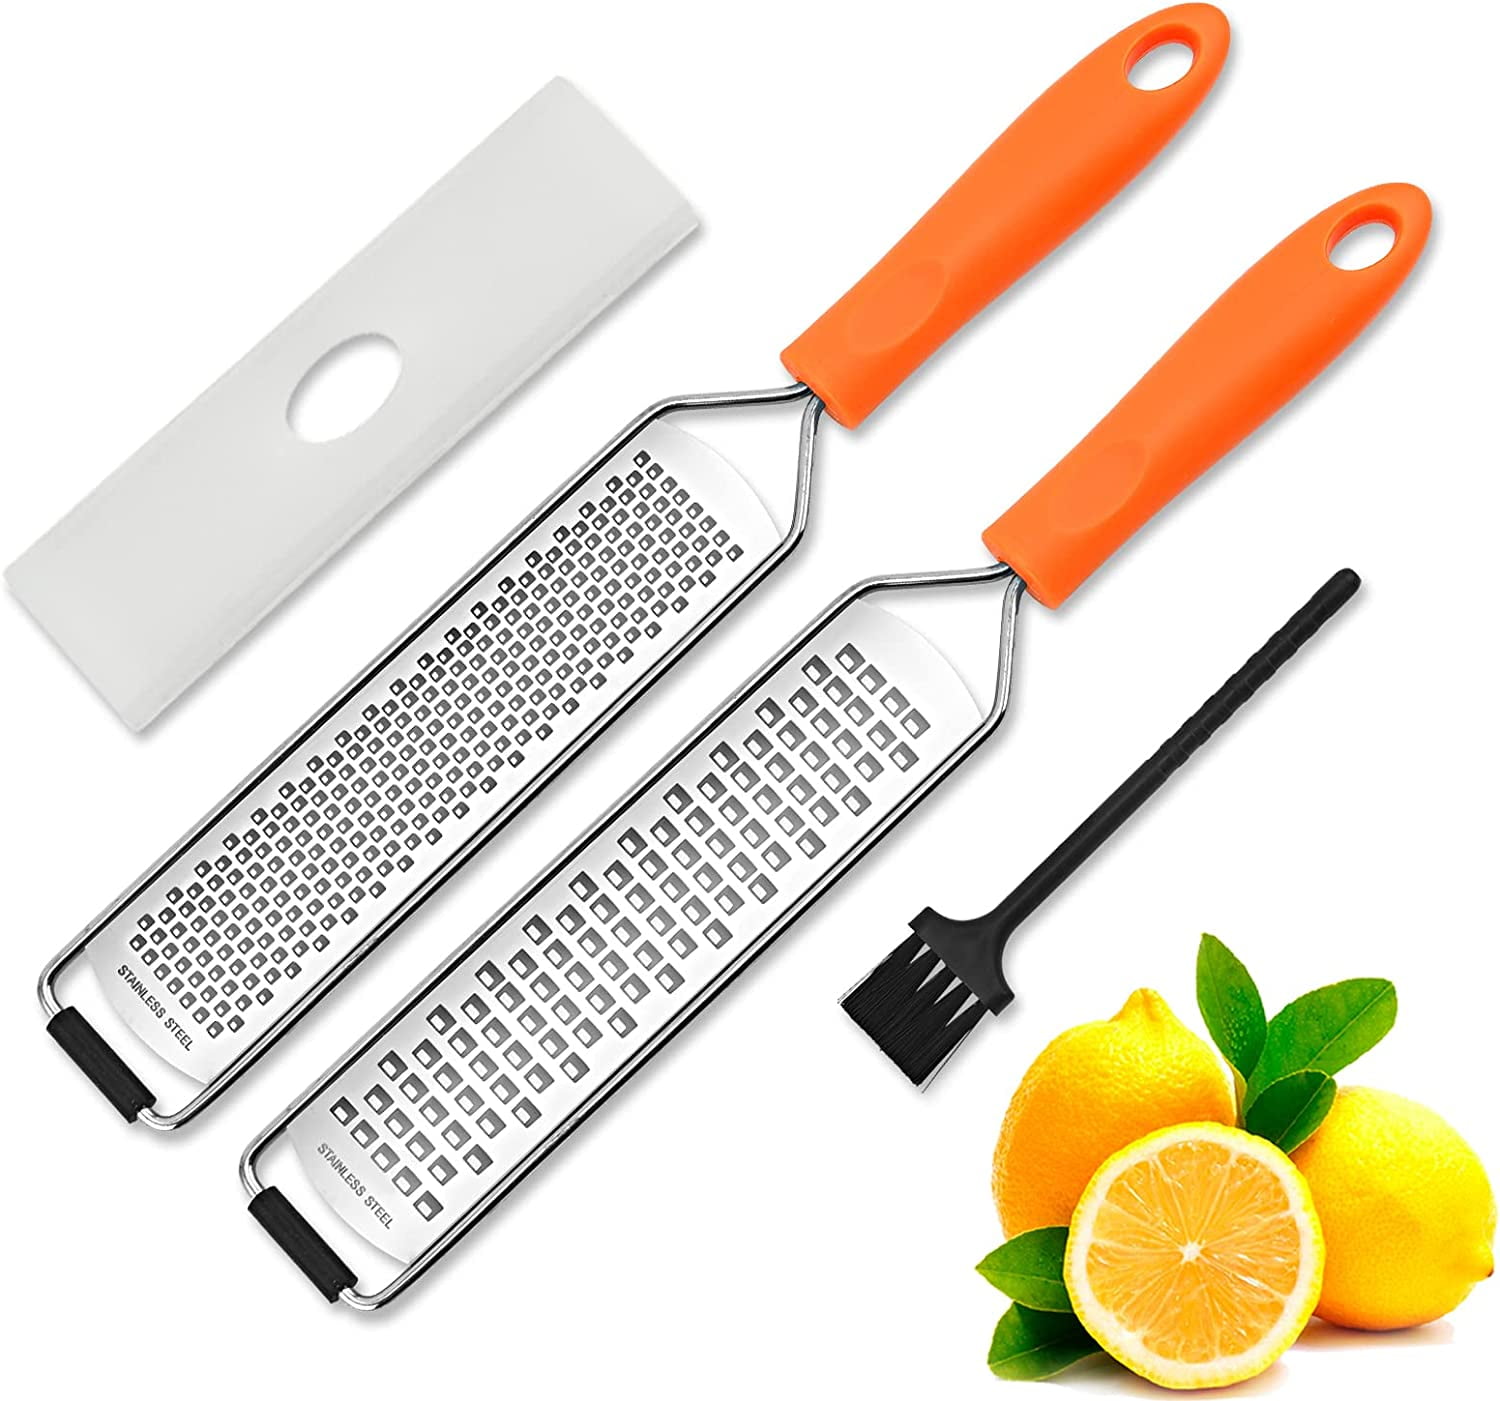  Zulay Kitchen Professional Cheese Grater Stainless Steel -  Durable Rust-Proof Metal Lemon Zester Grater With Handle - Flat Handheld  Grater For Cheese, Chocolate, Spices, And More - Black: Home & Kitchen